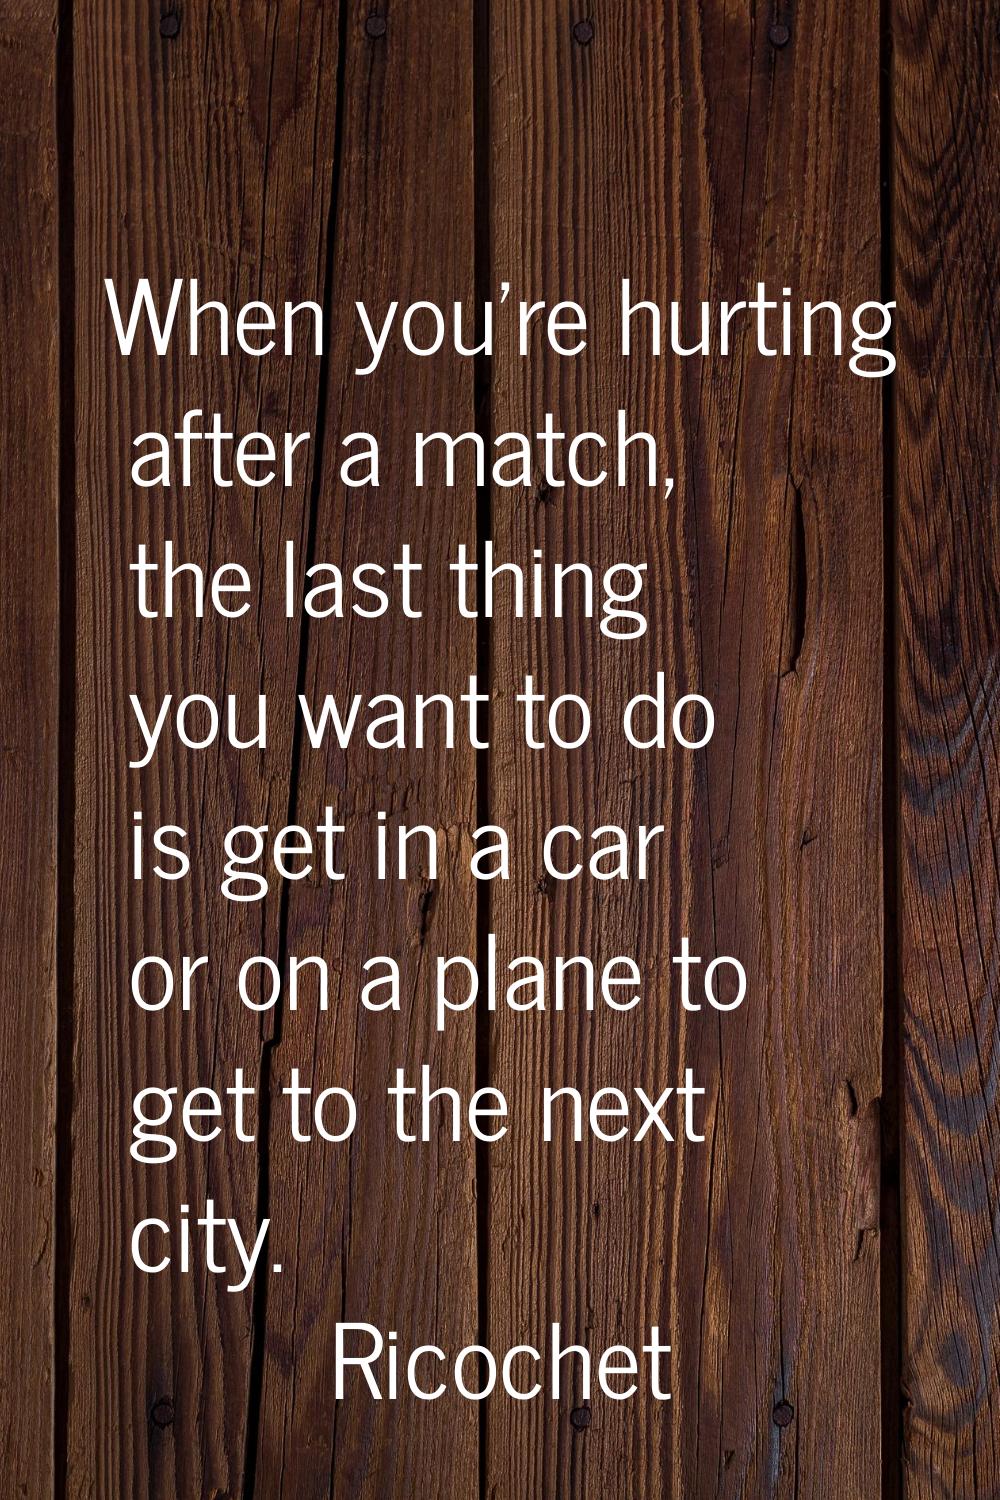 When you're hurting after a match, the last thing you want to do is get in a car or on a plane to g